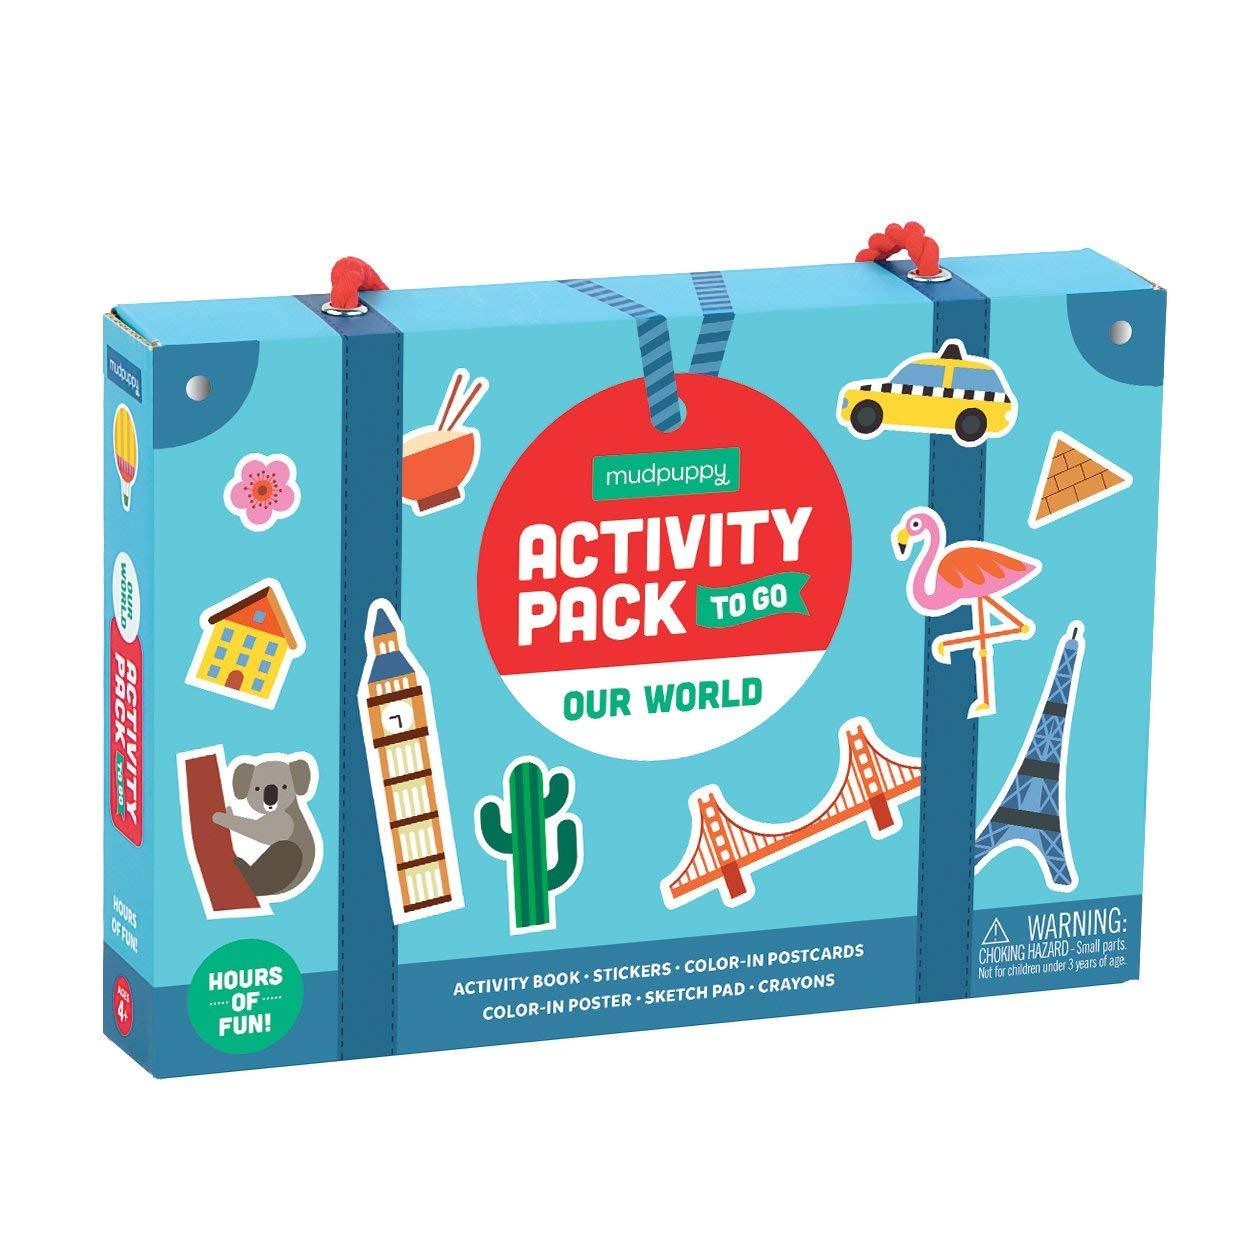 Our World Activity Pack